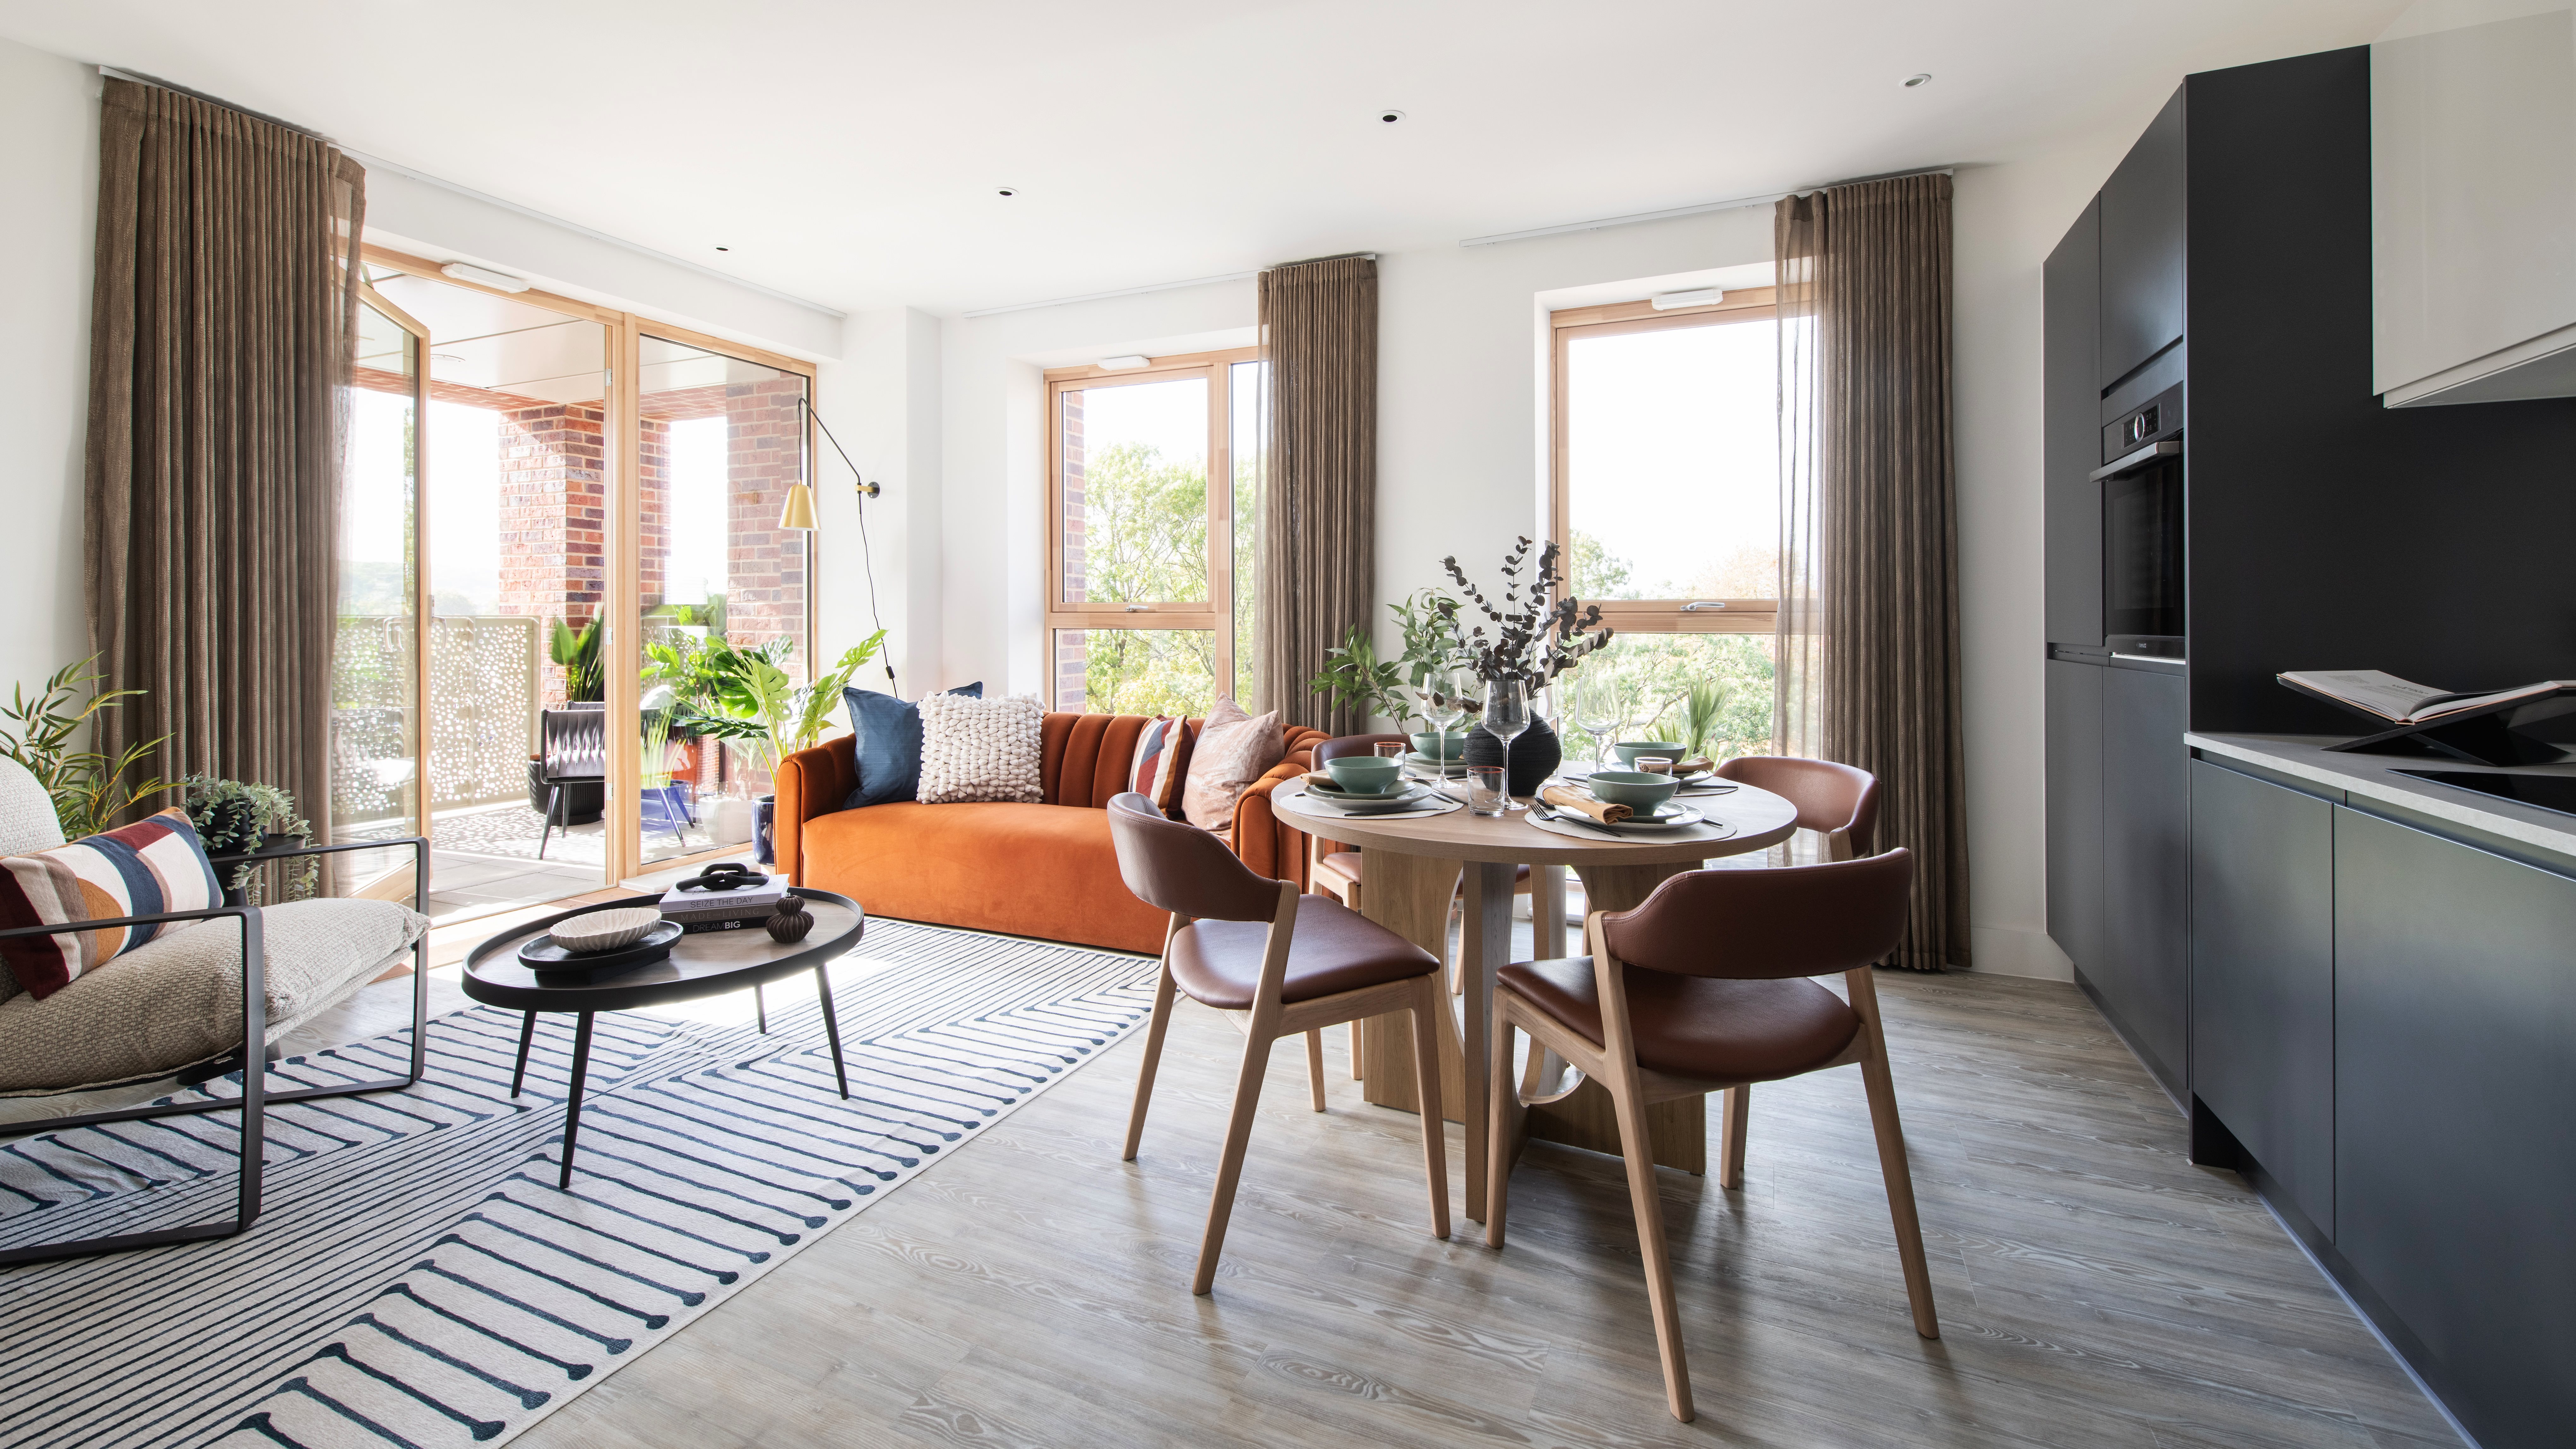 Homes at Southmere are designed with modern fittings and integrated appliances throughout